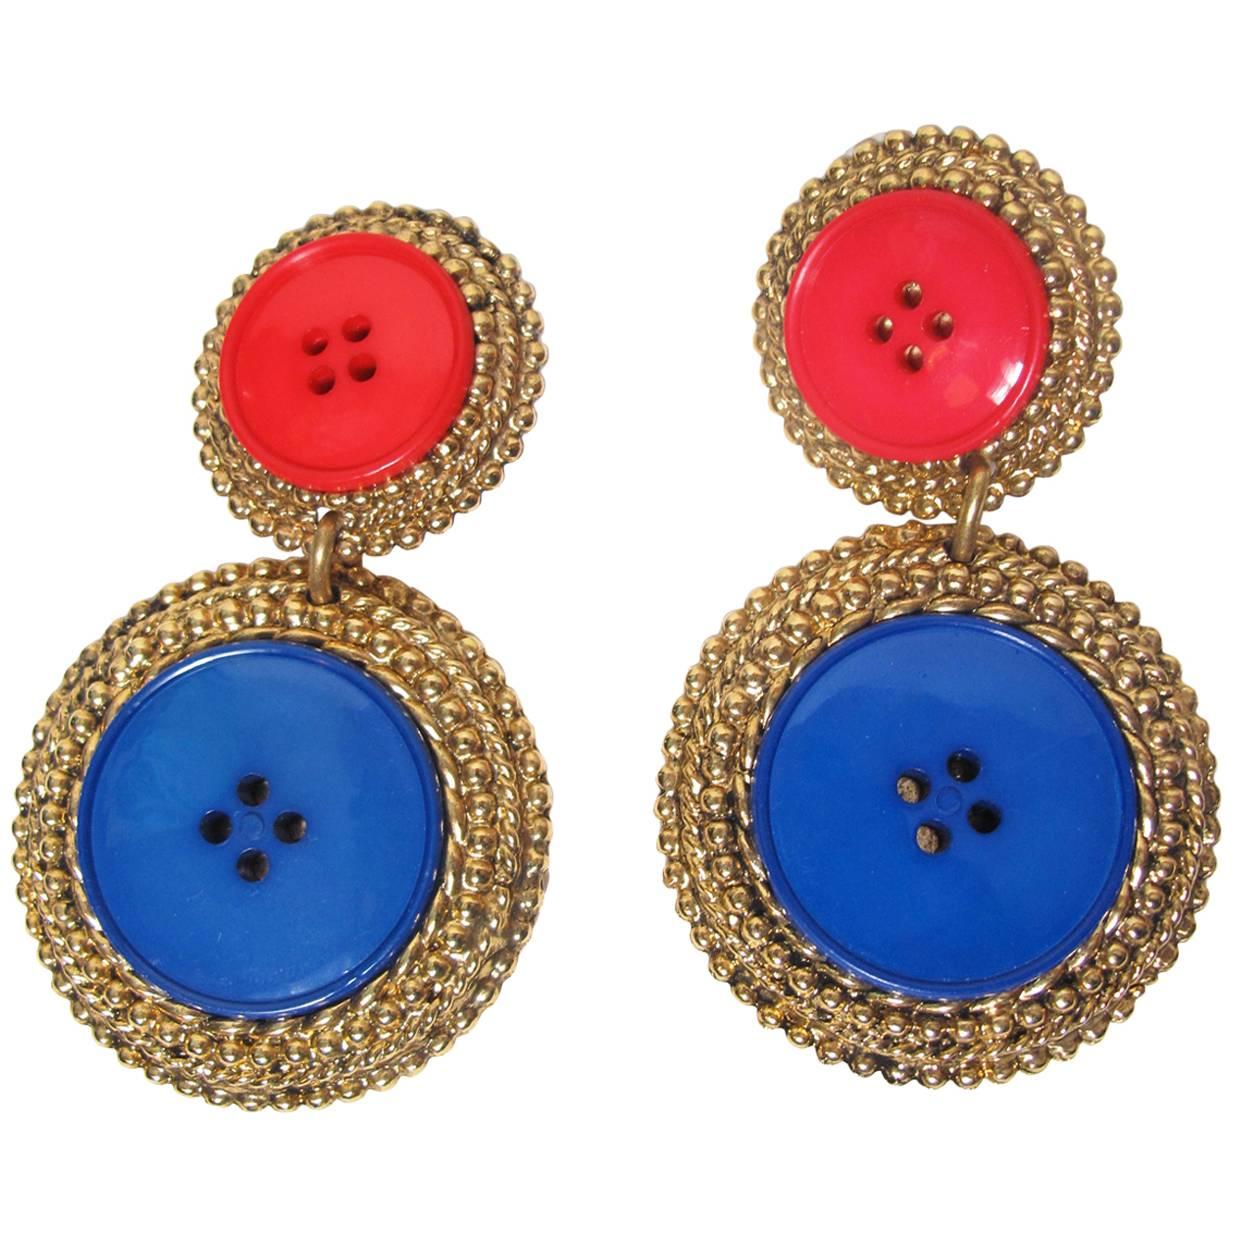 1980s Patrick Kelly Iconic Button Earrings - sale